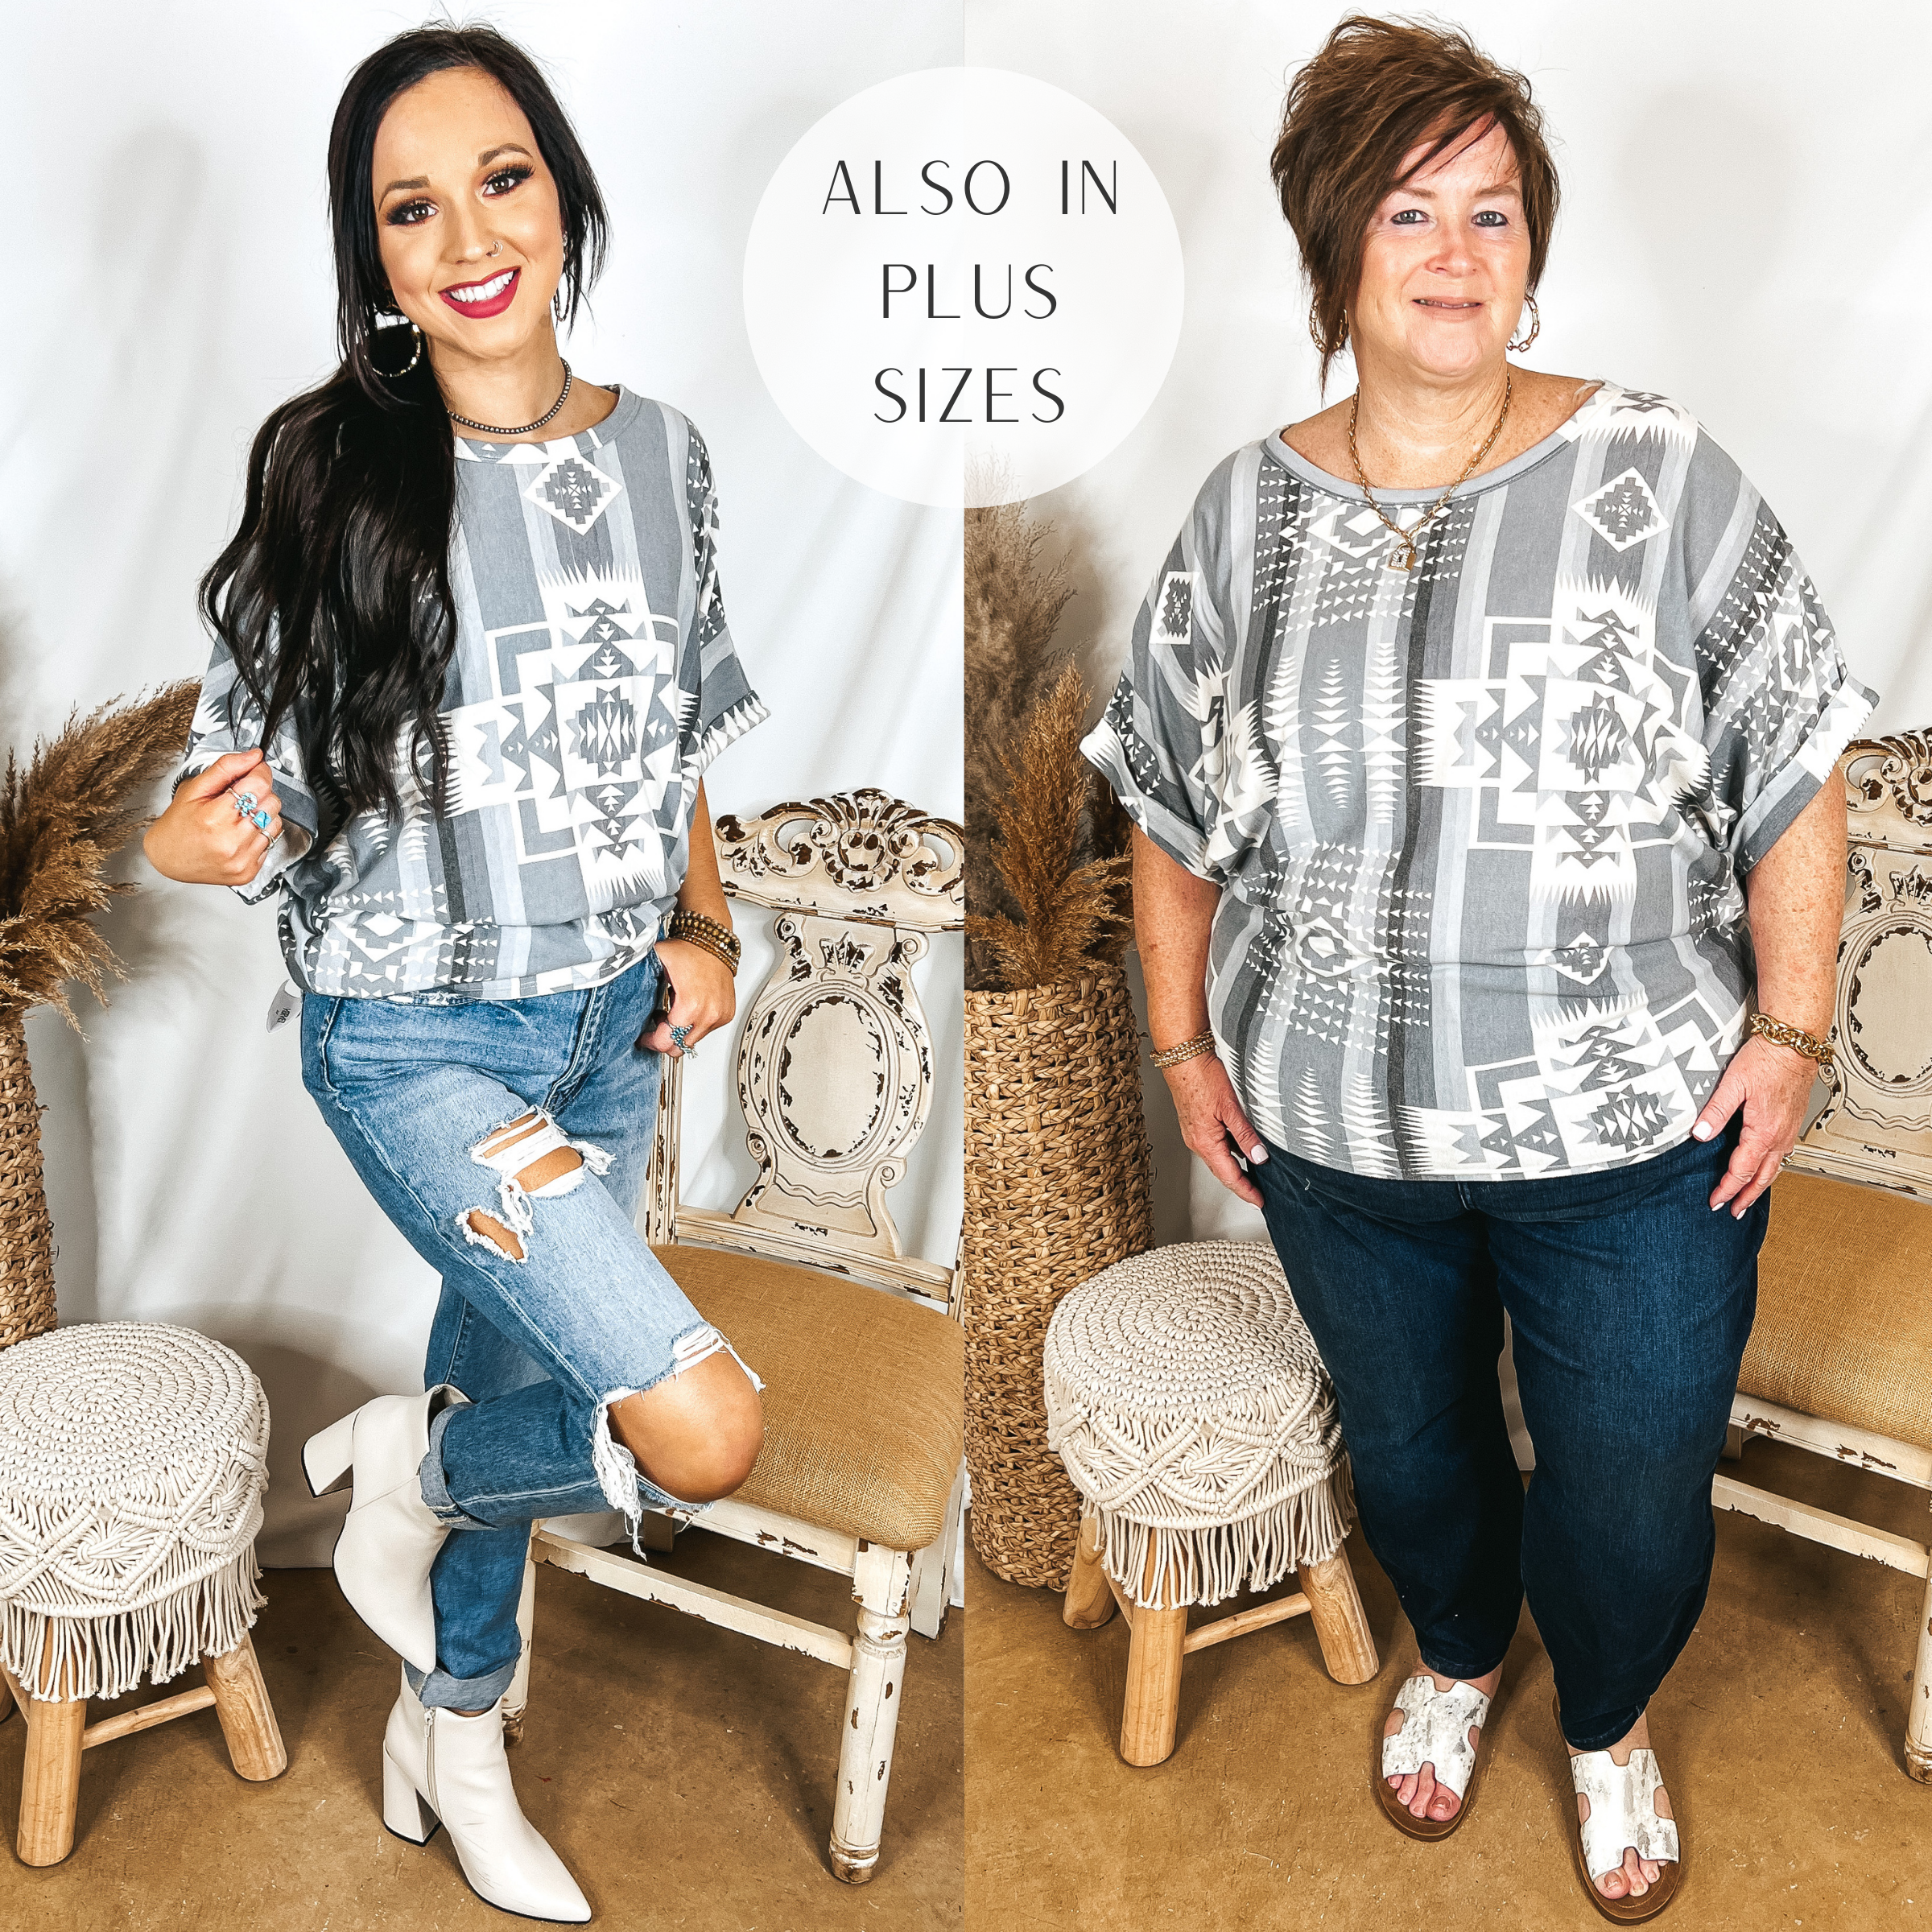 Size small model has it paired with light wash distressed jeans, white booties, and silver jewelry. Plus size model has it paired with dark wash jeans, white sandals, and gold jewelry.